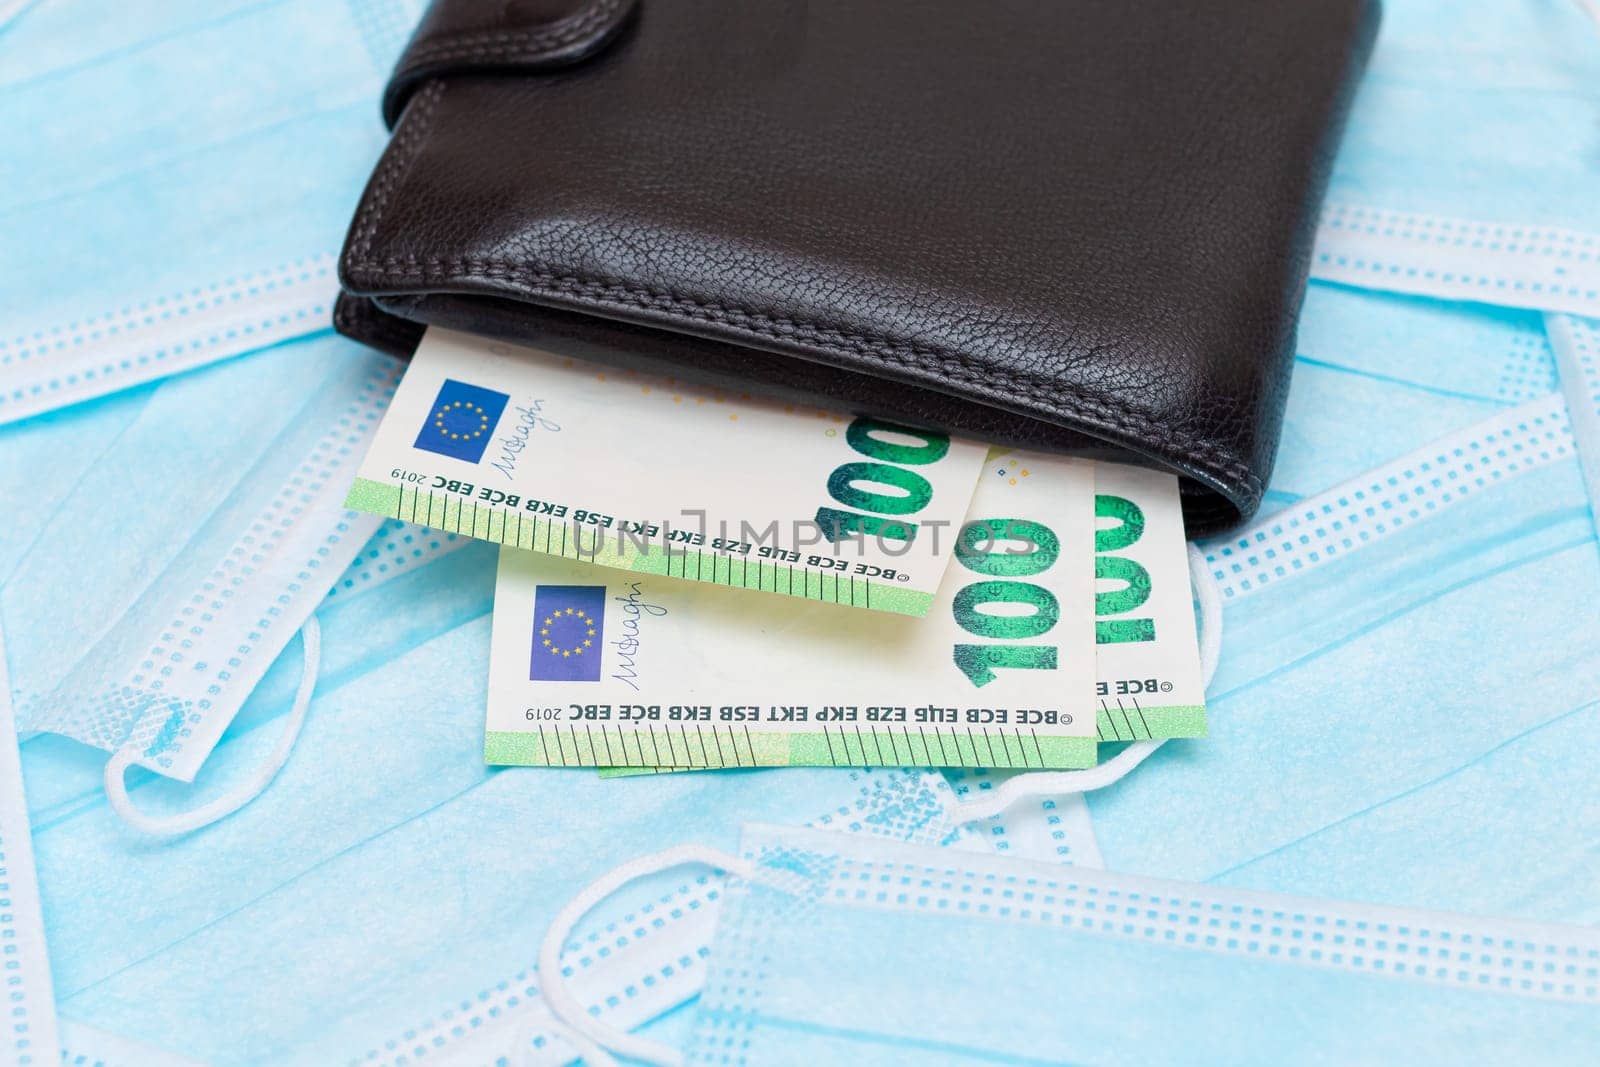 Black Men's Wallet with Euro Money Inside on the Blue Disposable Medical Face Masks by InfinitumProdux